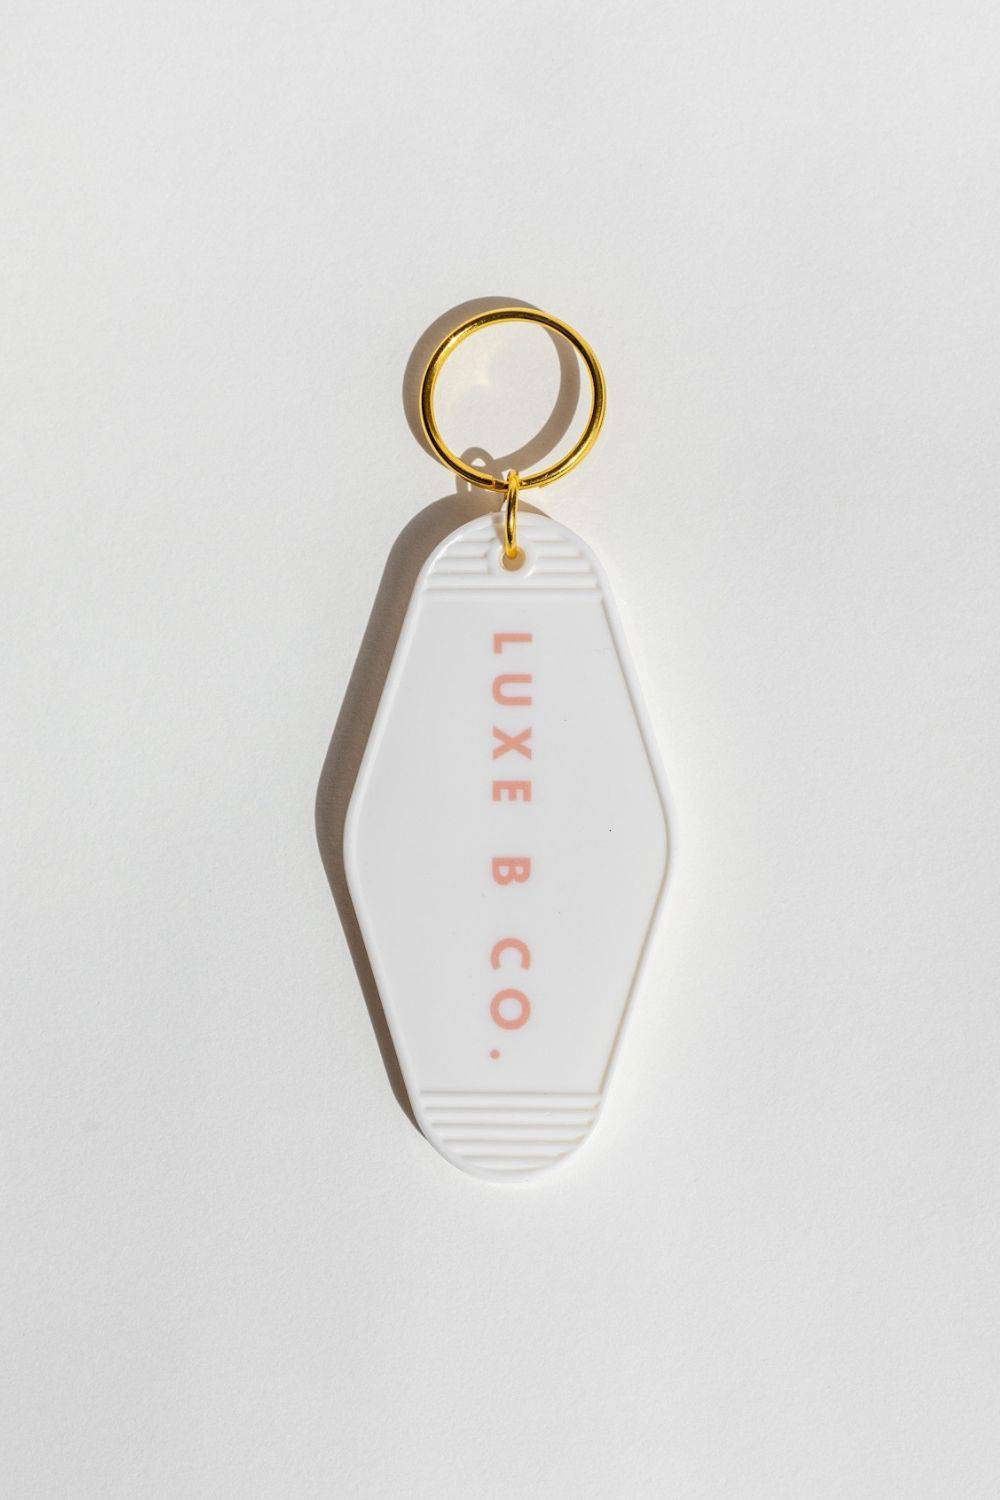 Luxe B Co. Keychain - Luxe B Co